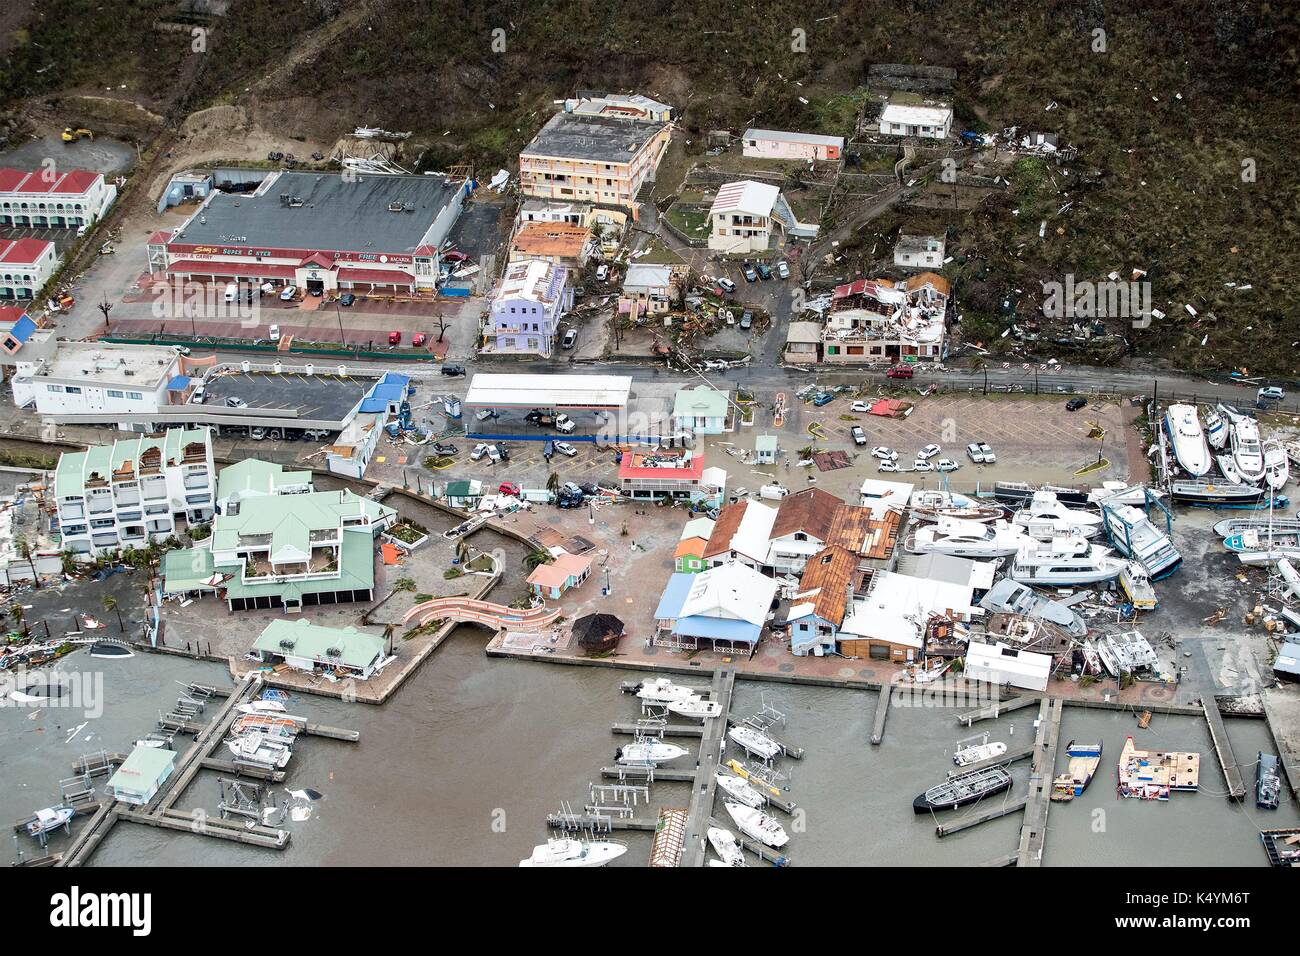 Philipsburg, St Maarten. 06th Sep, 2017. Massive destruction of the port and buildings in the wake of a direct hit by Hurricane Irma, a Category 5 storm lashing the Caribbean September 6, 2017 in Philipsburg, St. Maarten. Imra is packing winds of 185-mph making it the strongest hurricane ever recorded in the Atlantic Ocean. (Gerben Van Es/Netherlands Defence Ministry via Planetpix) Stock Photo